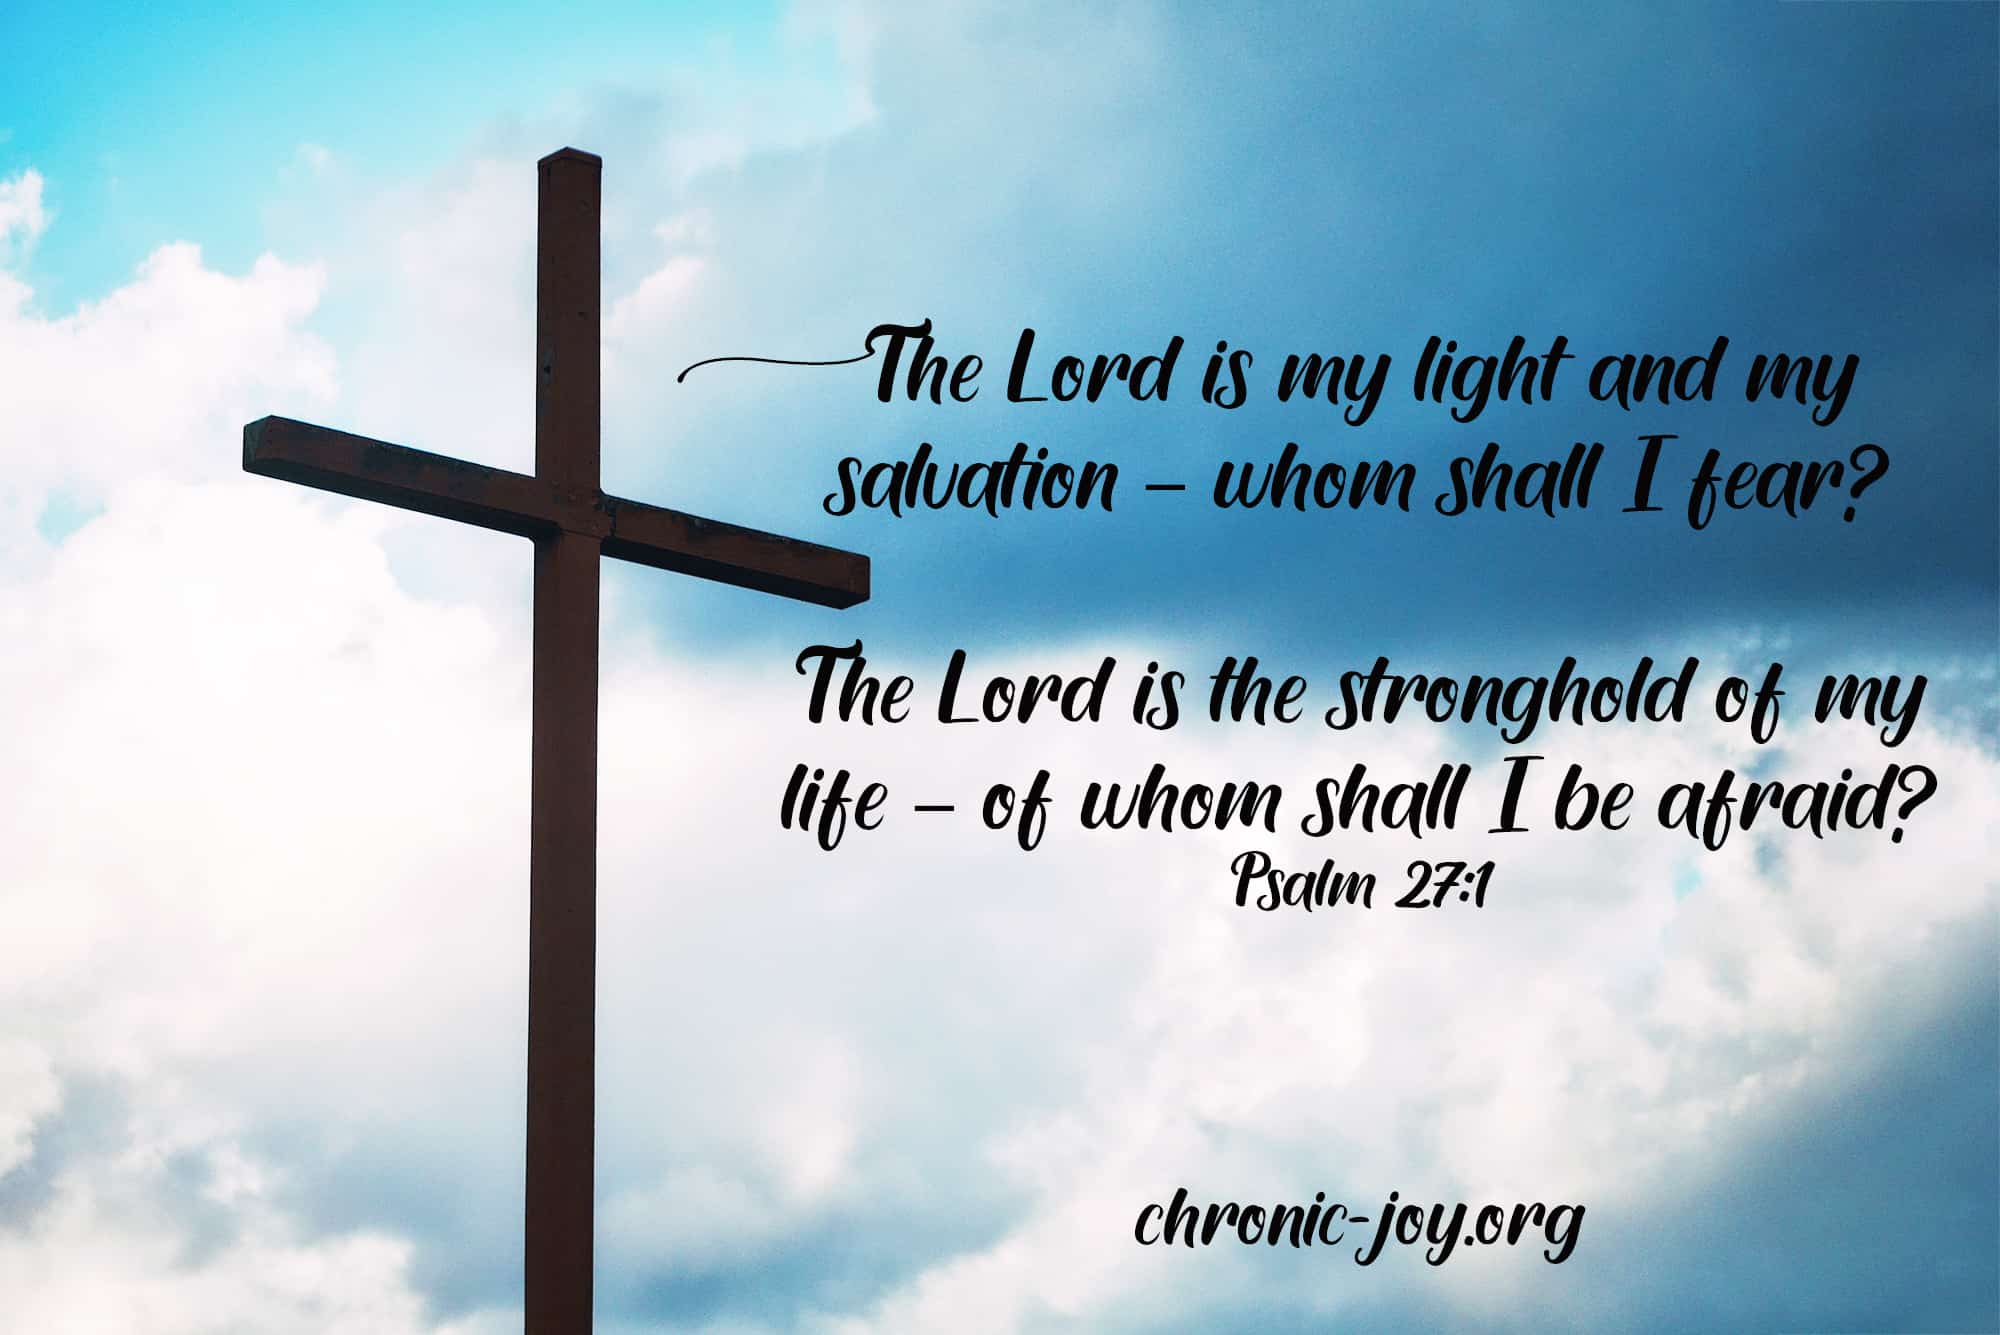 Of David. The LORD is my light and my salvation-- whom shall I fear? The LORD is the stronghold of my life-- of whom shall I be afraid? Psalm 27:1